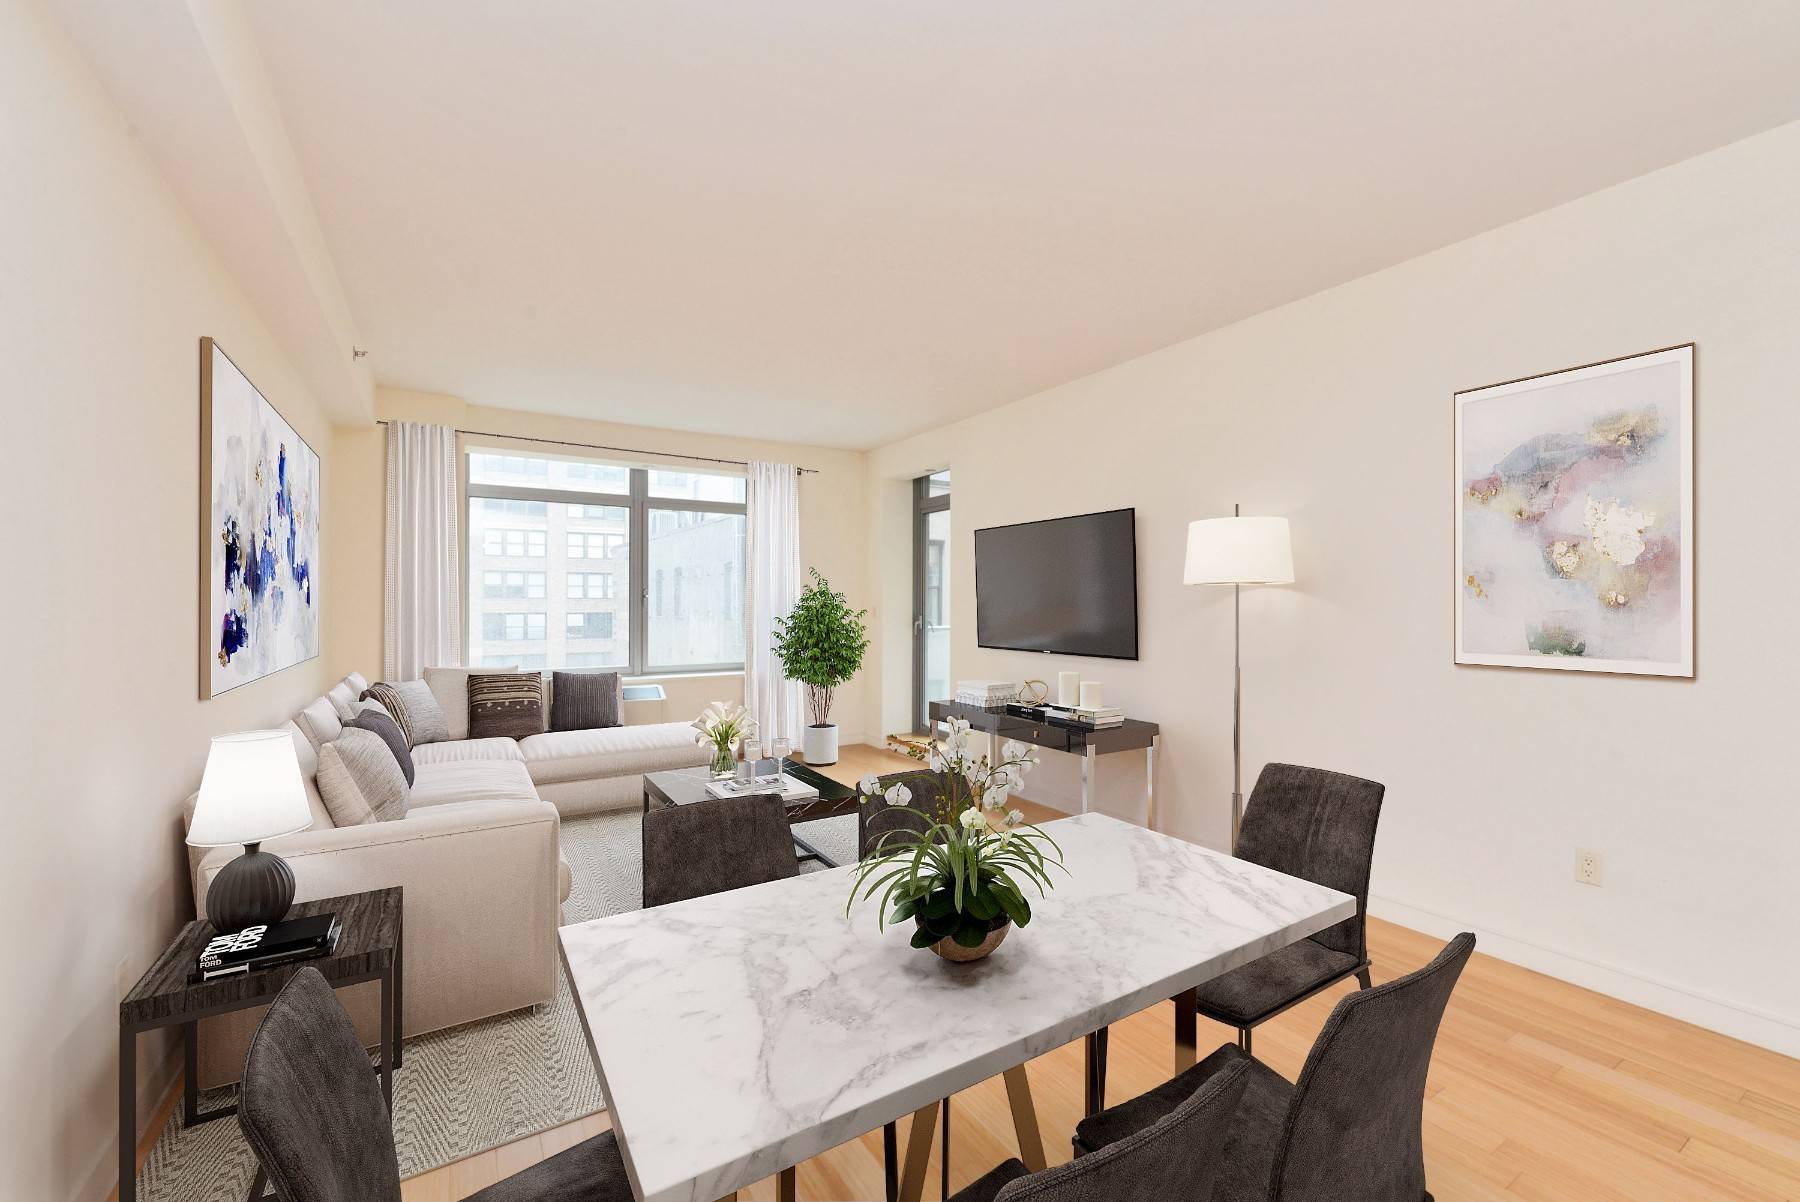 Motivated Seller. Pristine, sun filled convertible 2 bedroom unit conveniently located in an upscale, condo building in the heart of Kips Bay in Manhattan within close proximity to major transportation, ...